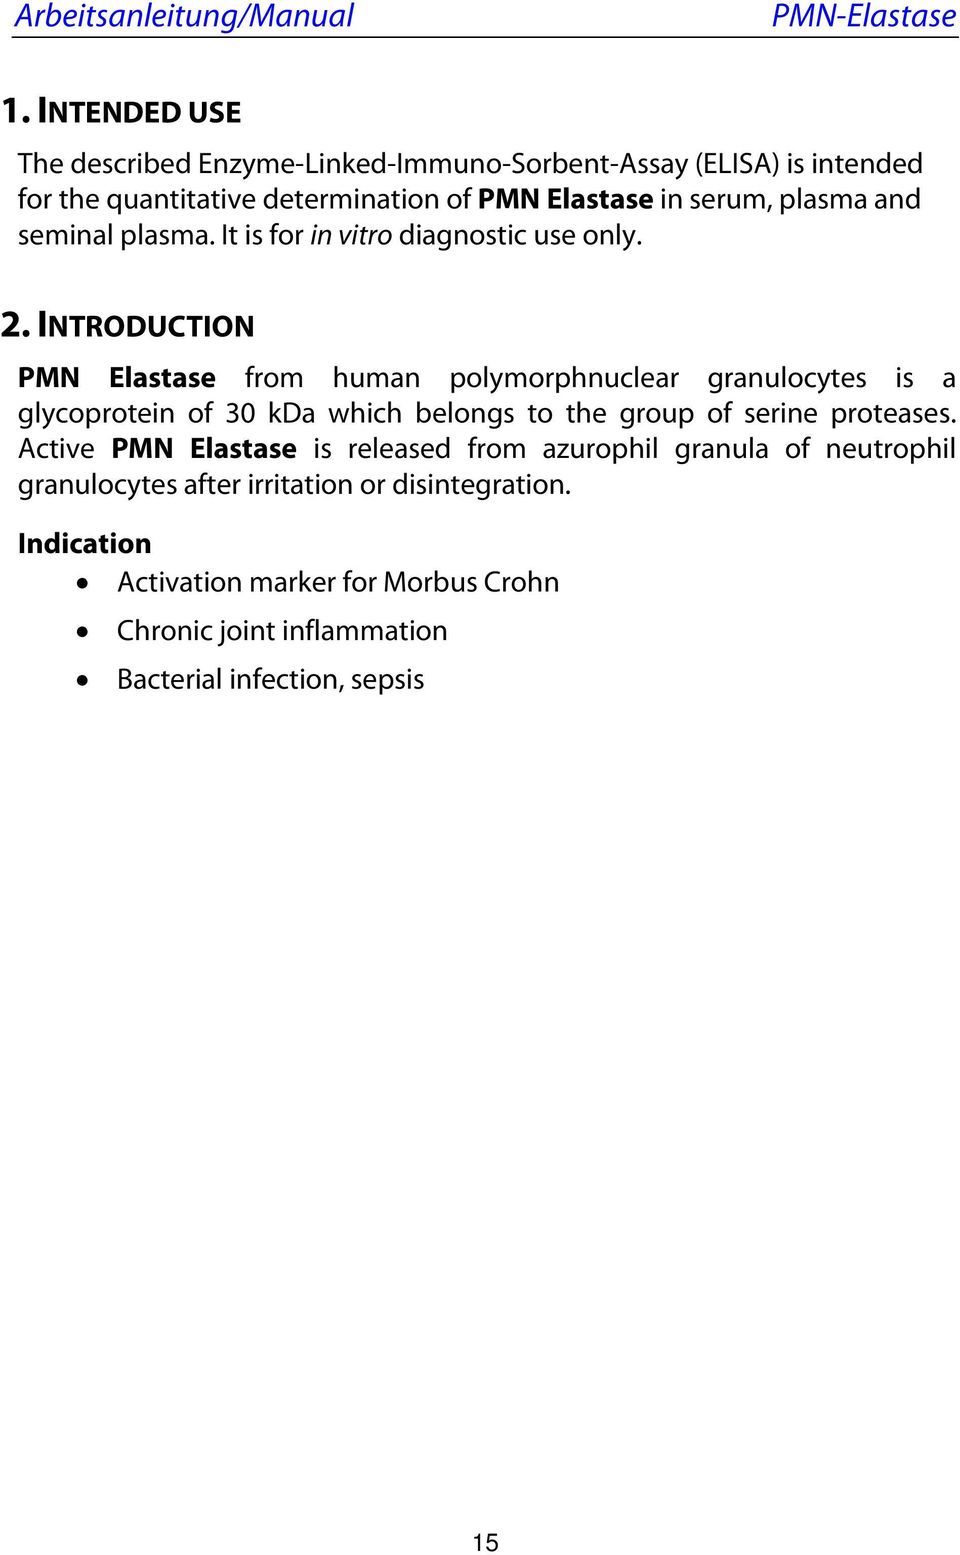 INTRODUCTION PMN Elastase from human polymorphnuclear granulocytes is a glycoprotein of 30 kda which belongs to the group of serine proteases.